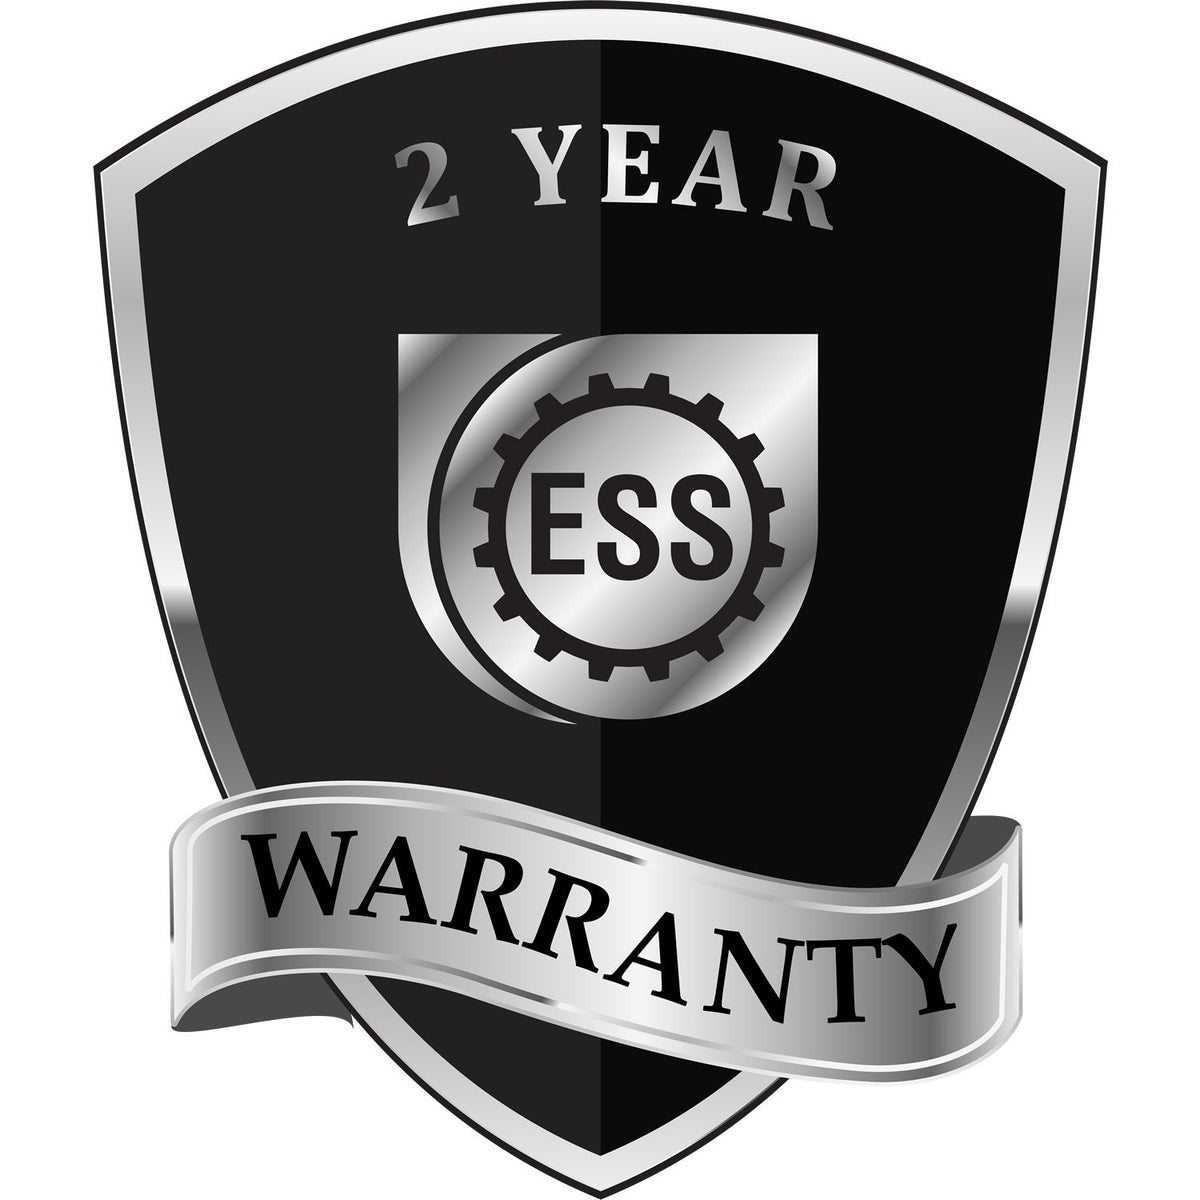 A badge or emblem showing a warranty icon for the Extended Long Reach Michigan Architect Seal Embosser